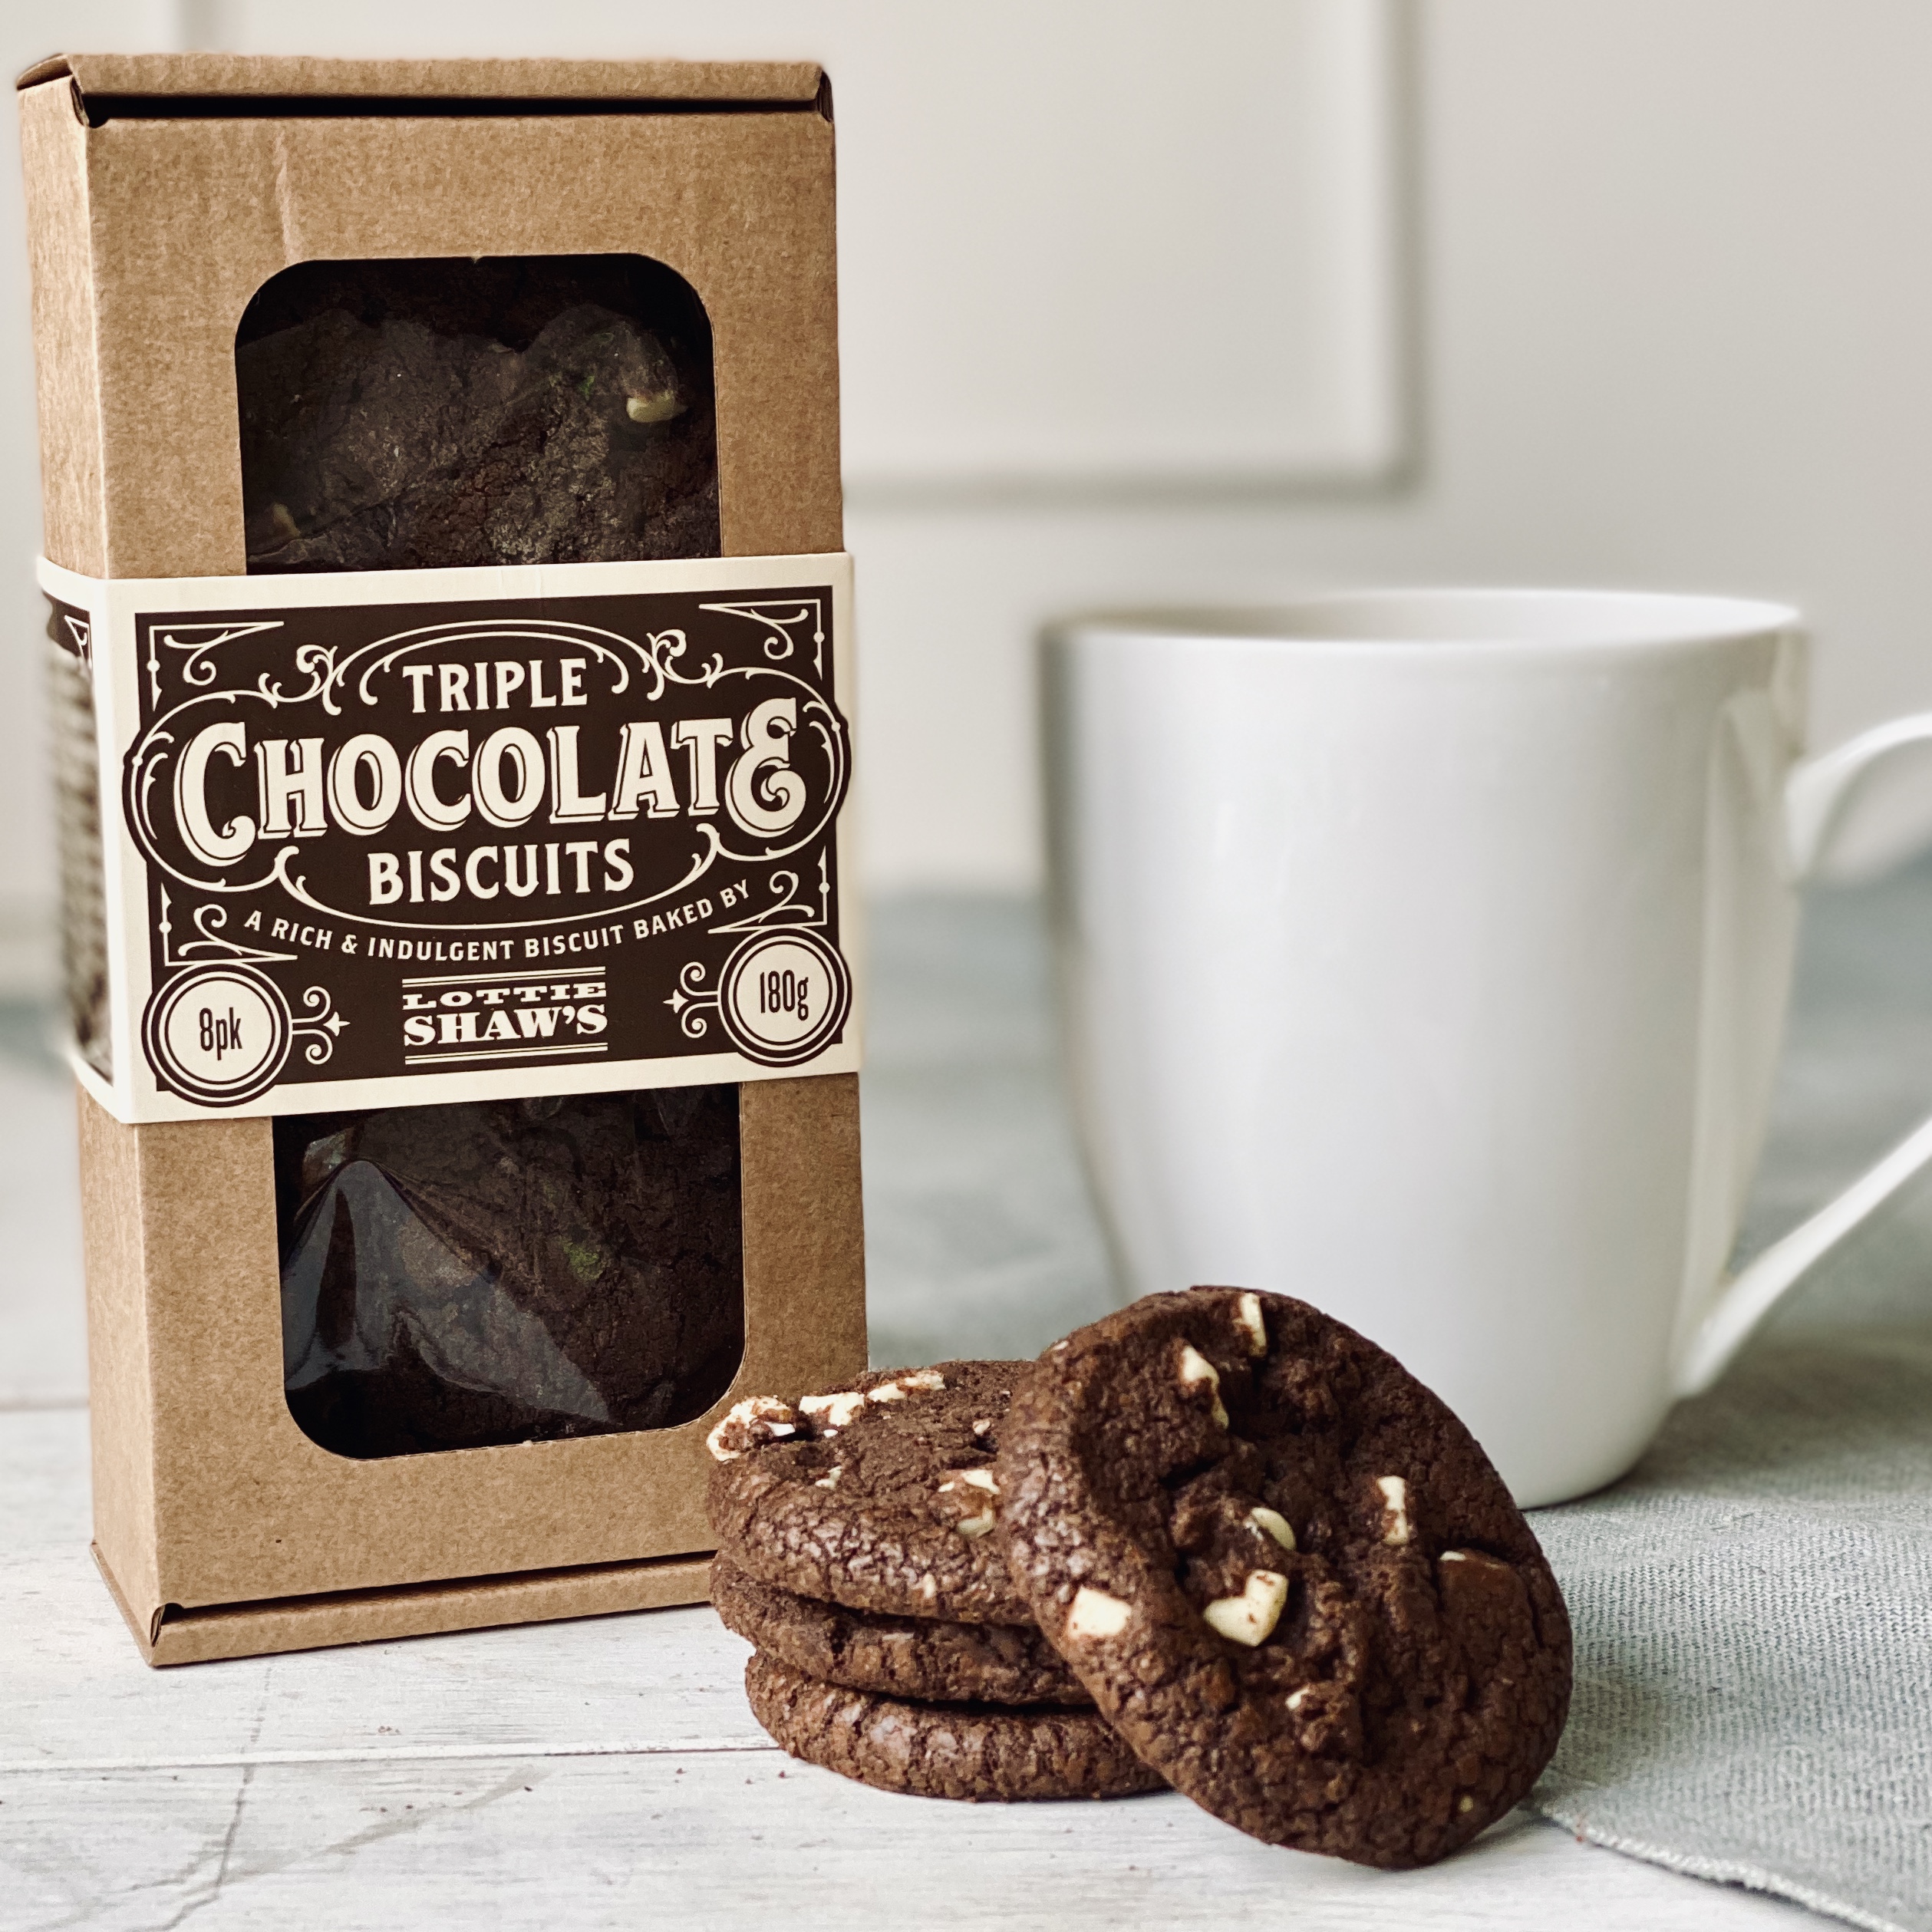 Lottie Shaw's Triple Chocolate Biscuits